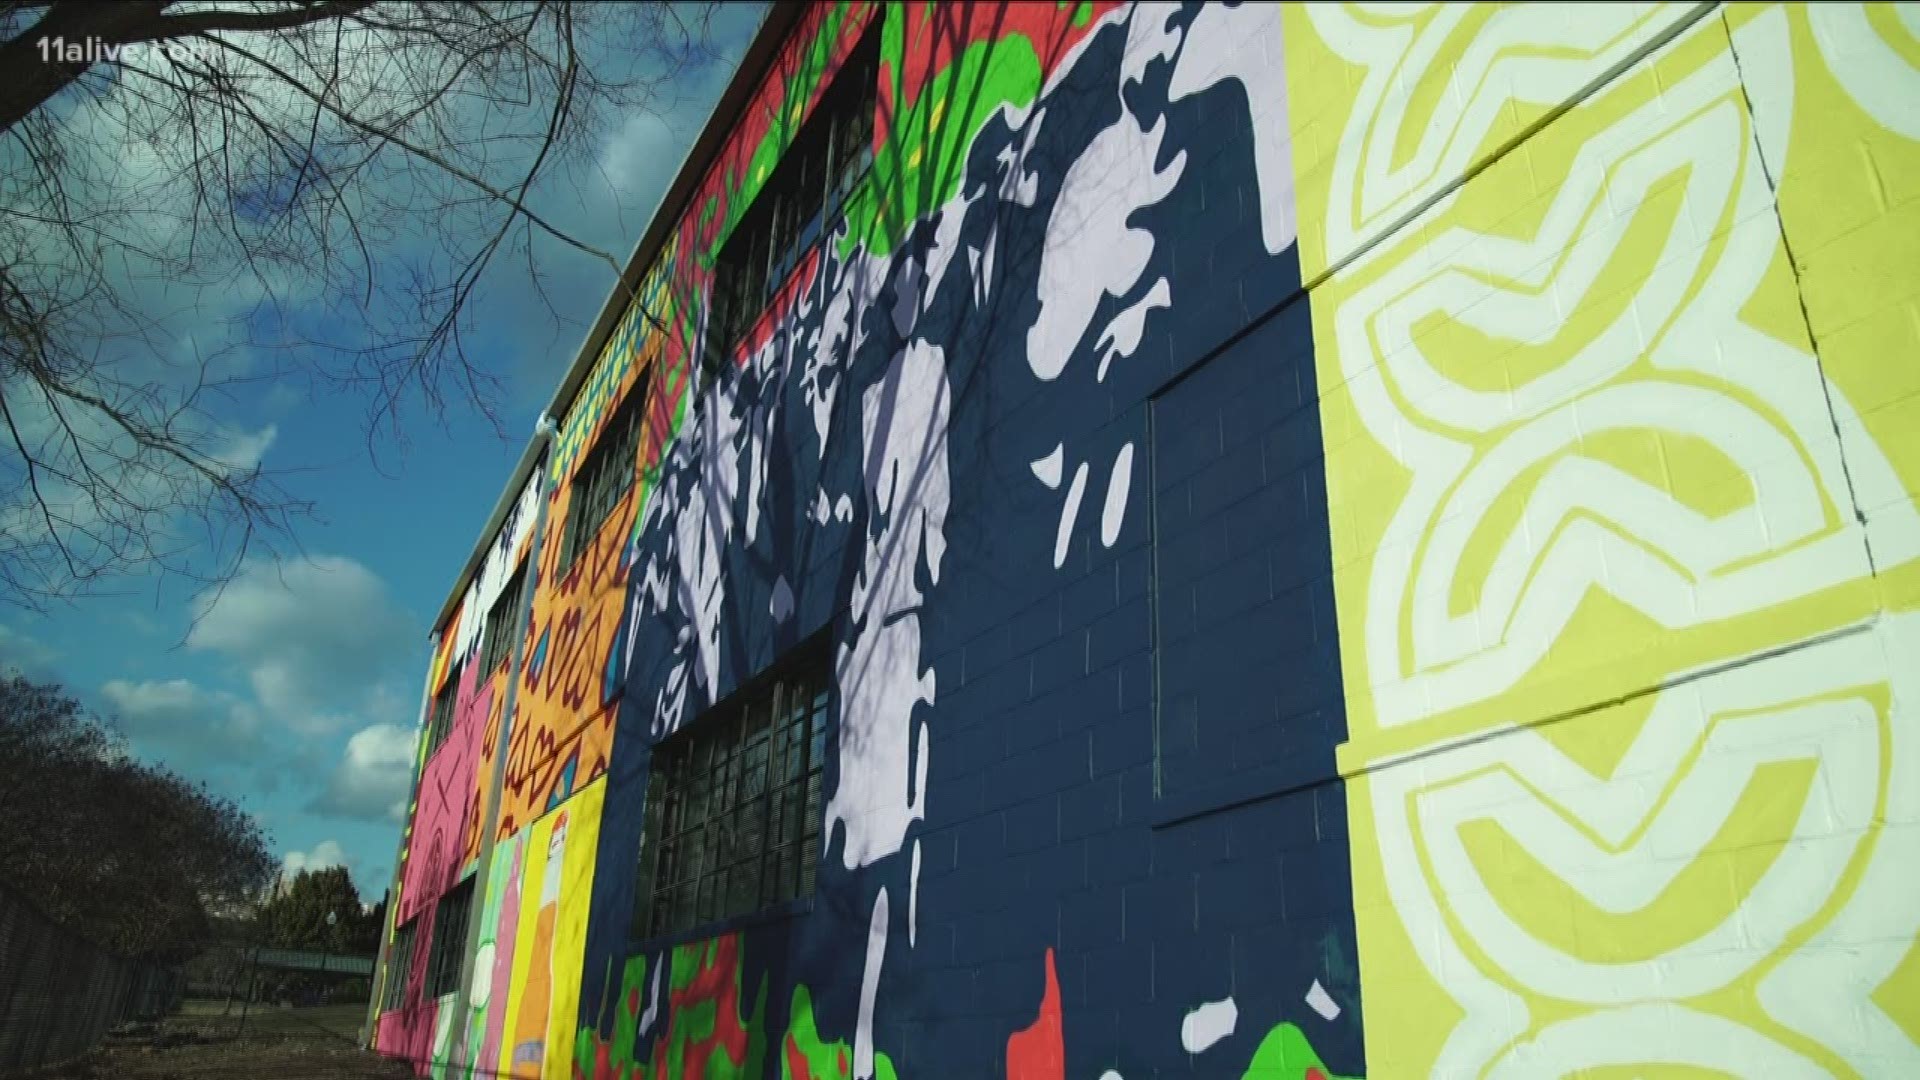 For the last few months, while crews have been putting up signs and ads promoting Super Bowl 53, eleven artists have been painting murals across the city, commissioned because of the Super Bowl